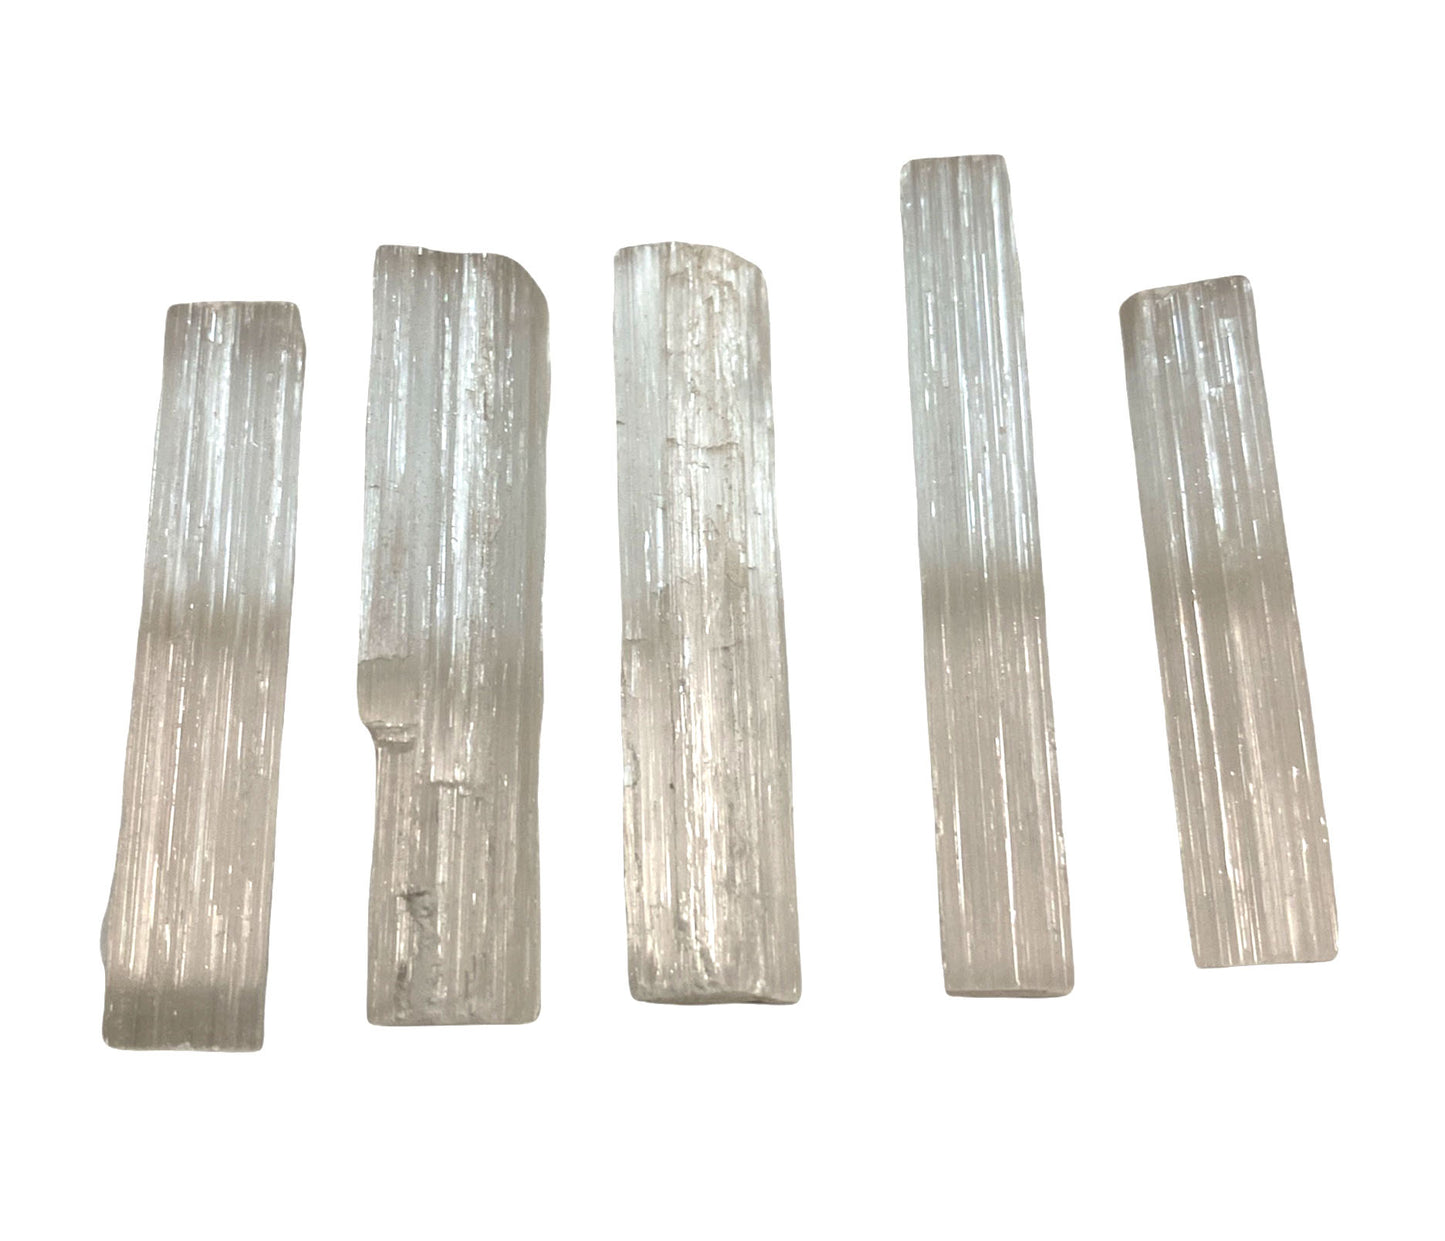 SELENITE Unpolished Raw Sticks 2 inch x 10mm - India - Order in 5's - NEW921